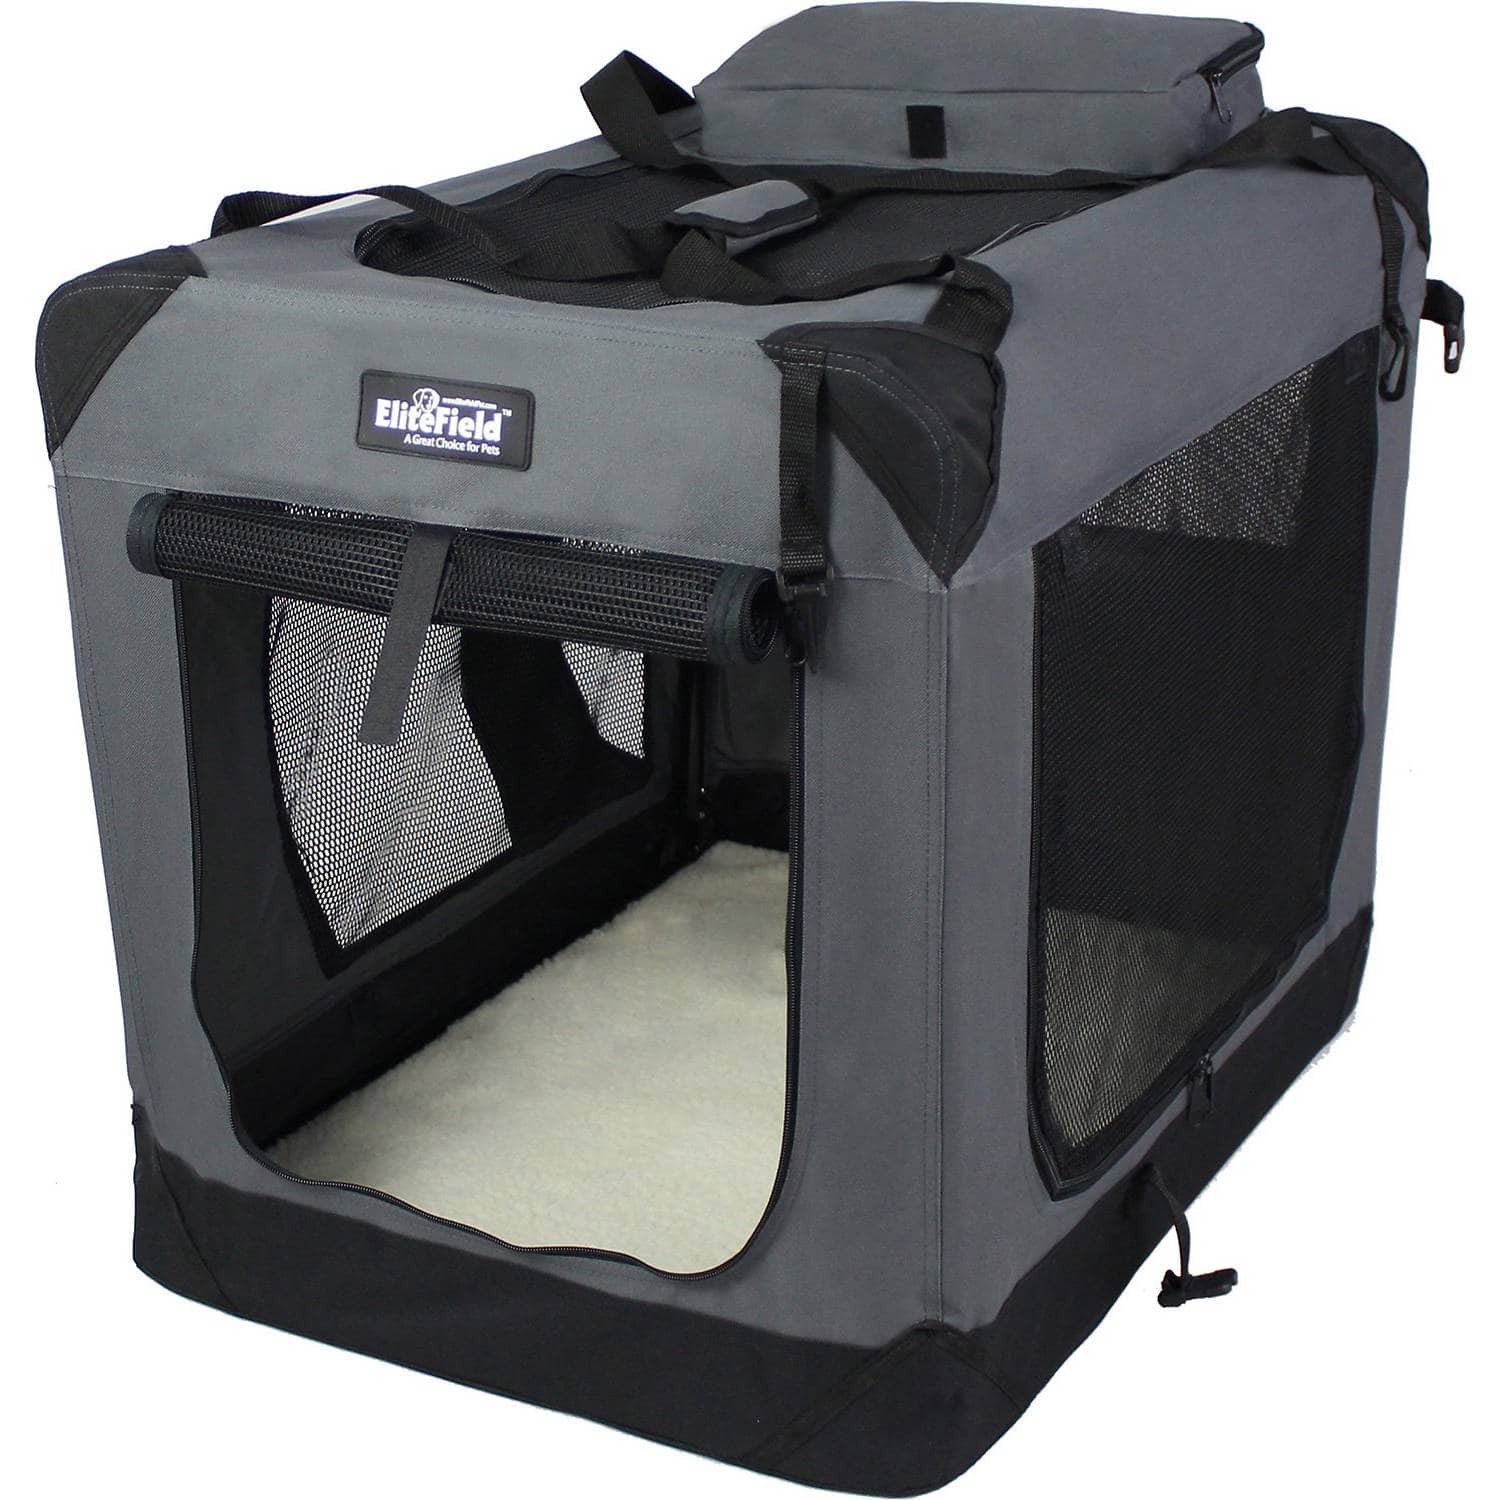 EliteField 3-Door Collapsible Soft-Sided Dog Crate (1)